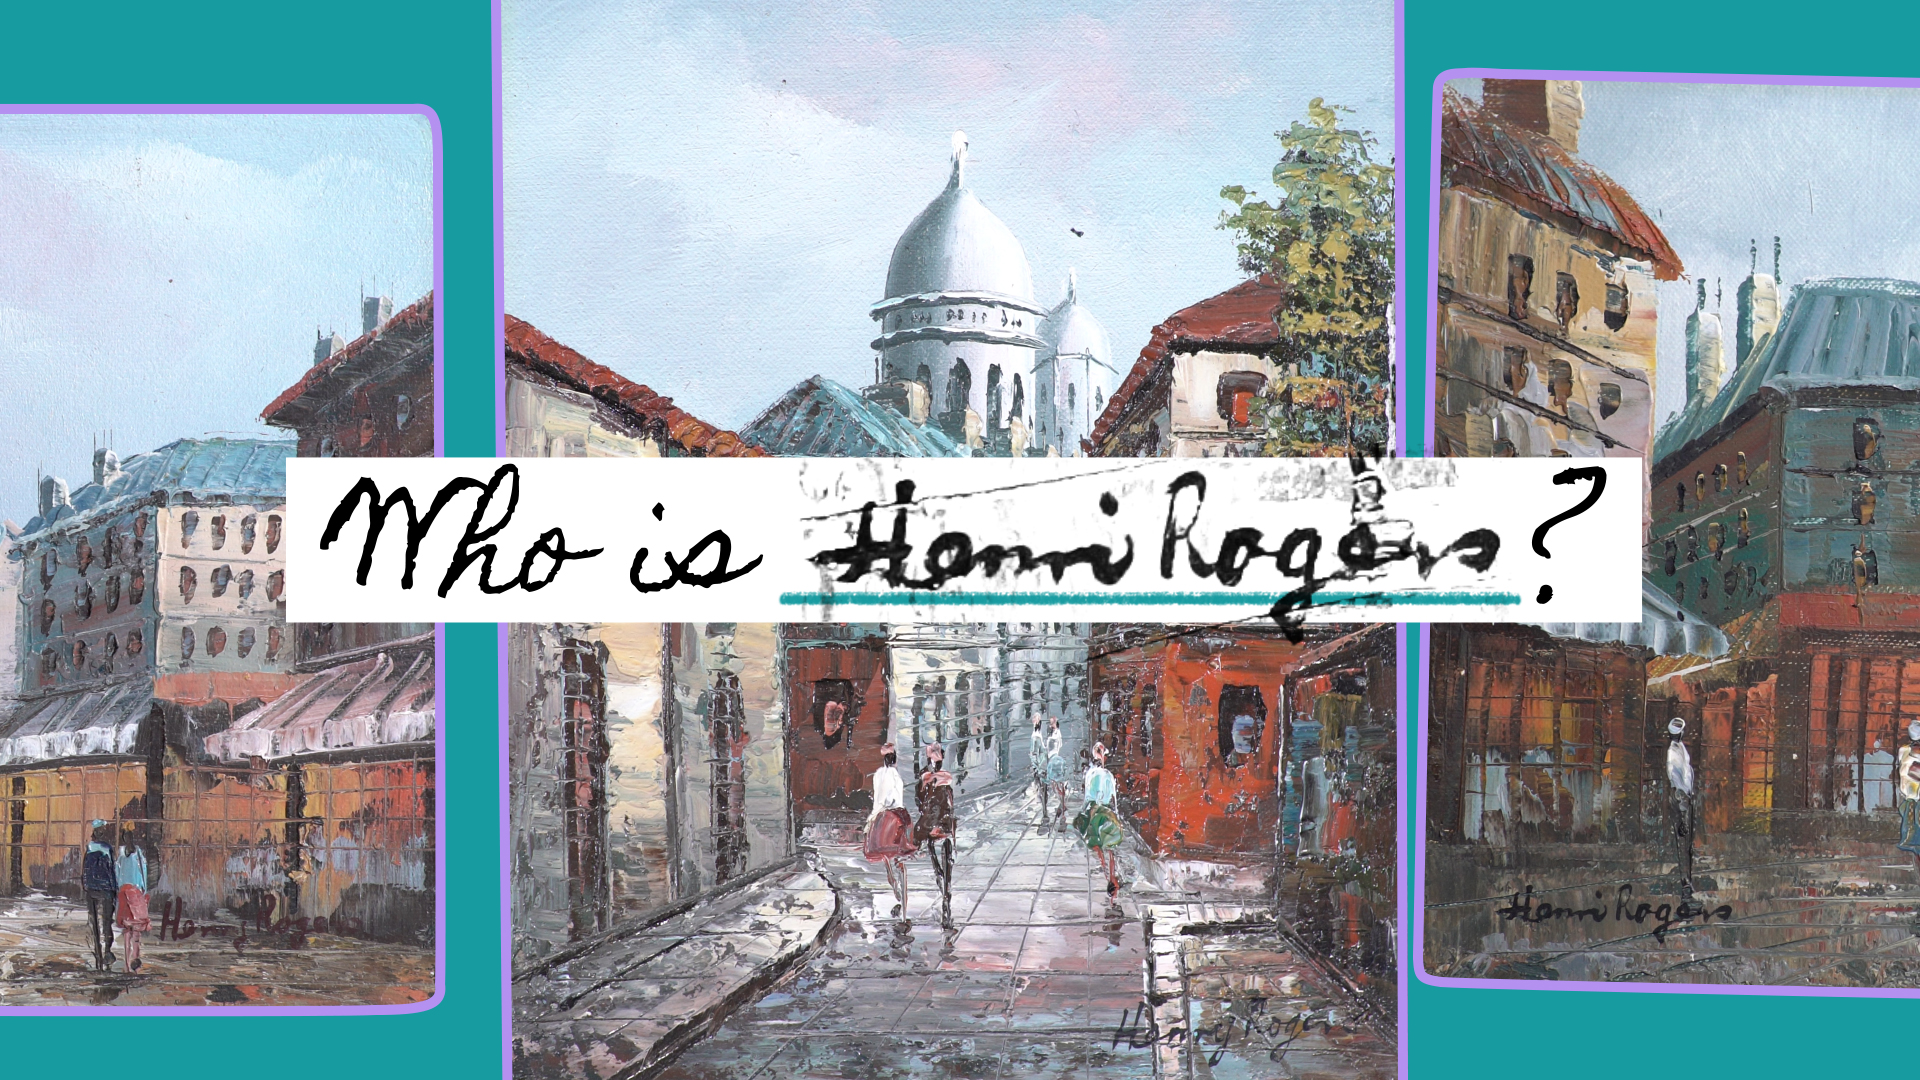 An illustration combining several parts of different paintings depicting Paris in an impressionist style, with “Who is Henri Rogers?” handwritten across them.